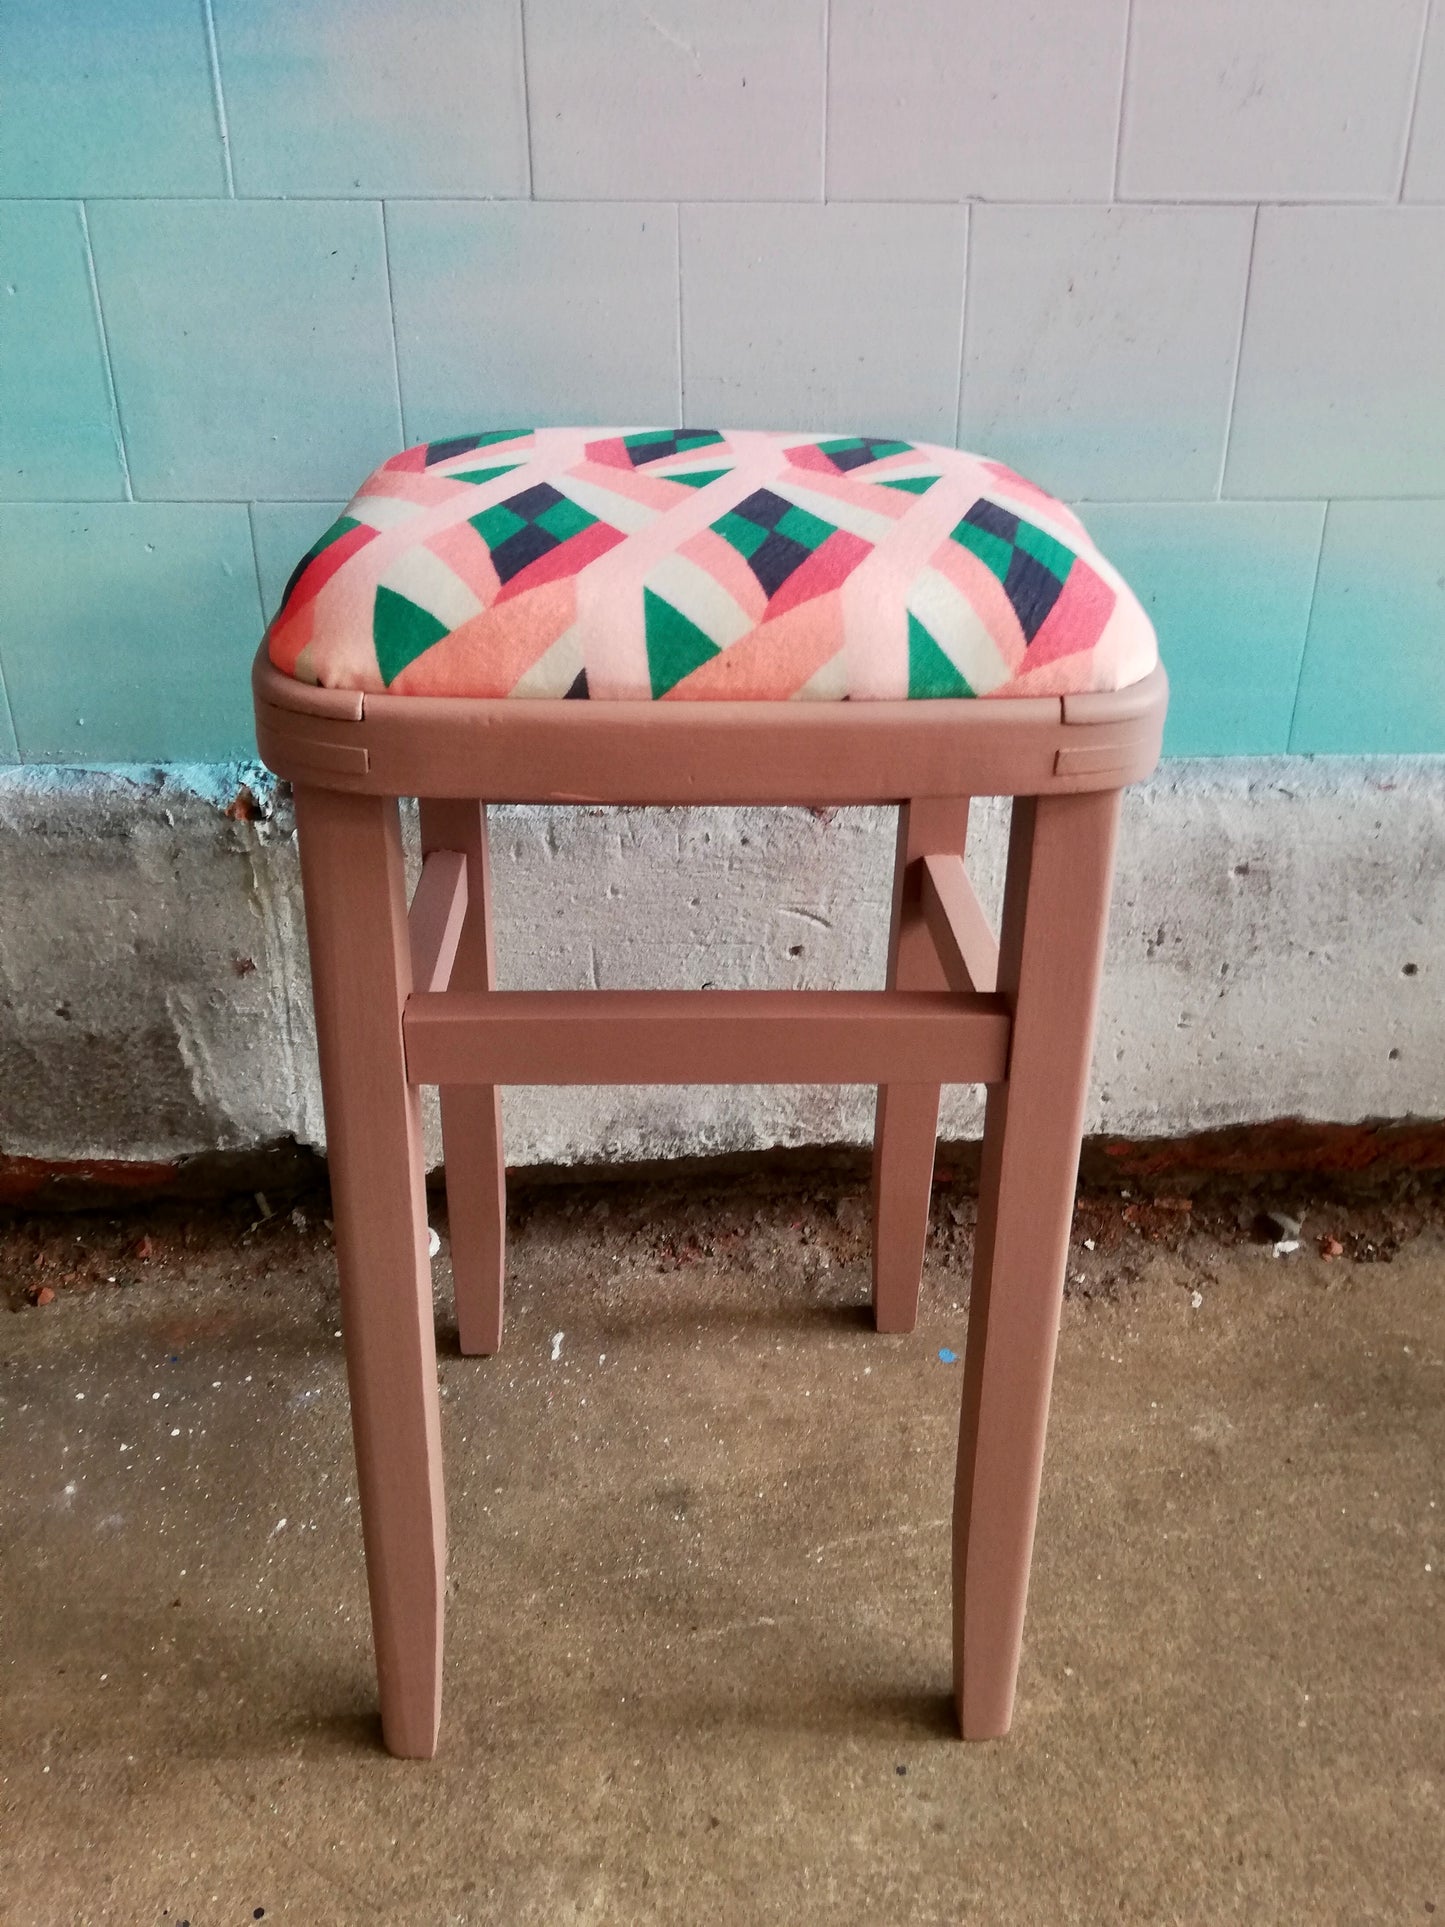 4 vintage stools all painted and reupholstered in beautiful geometric velvet